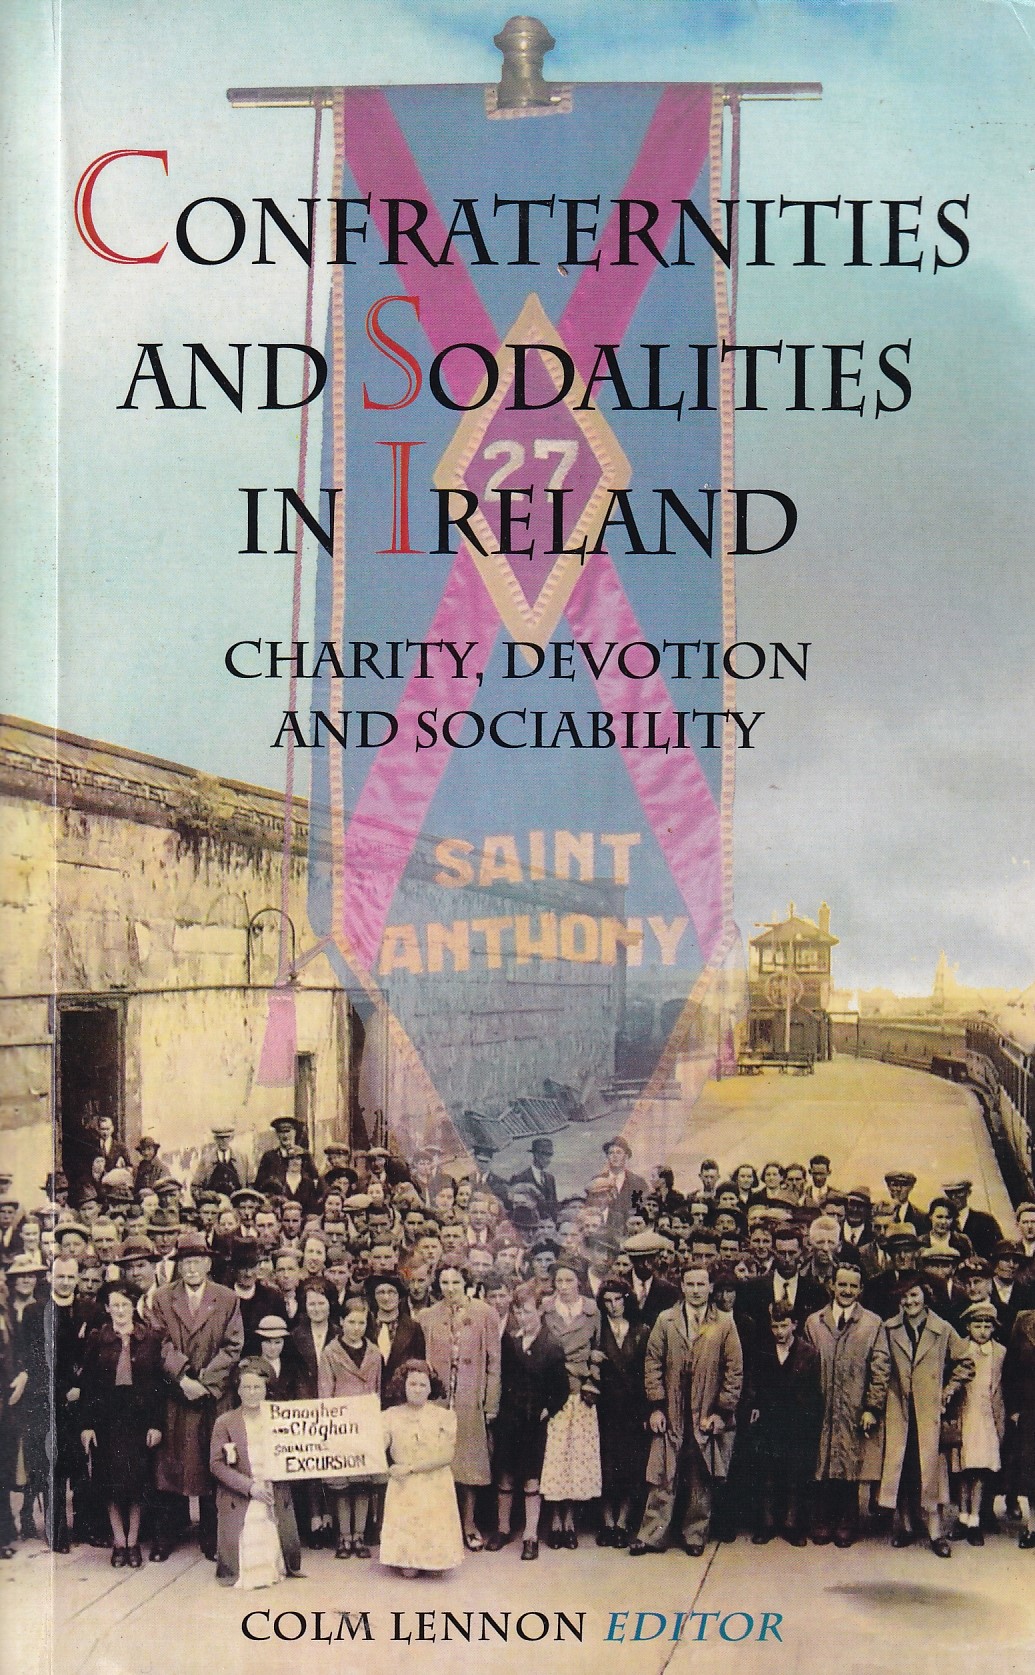 Confraternities and Sodalities in Ireland: Charity, Devotion and Sociability by Colm Lennon (ed.)